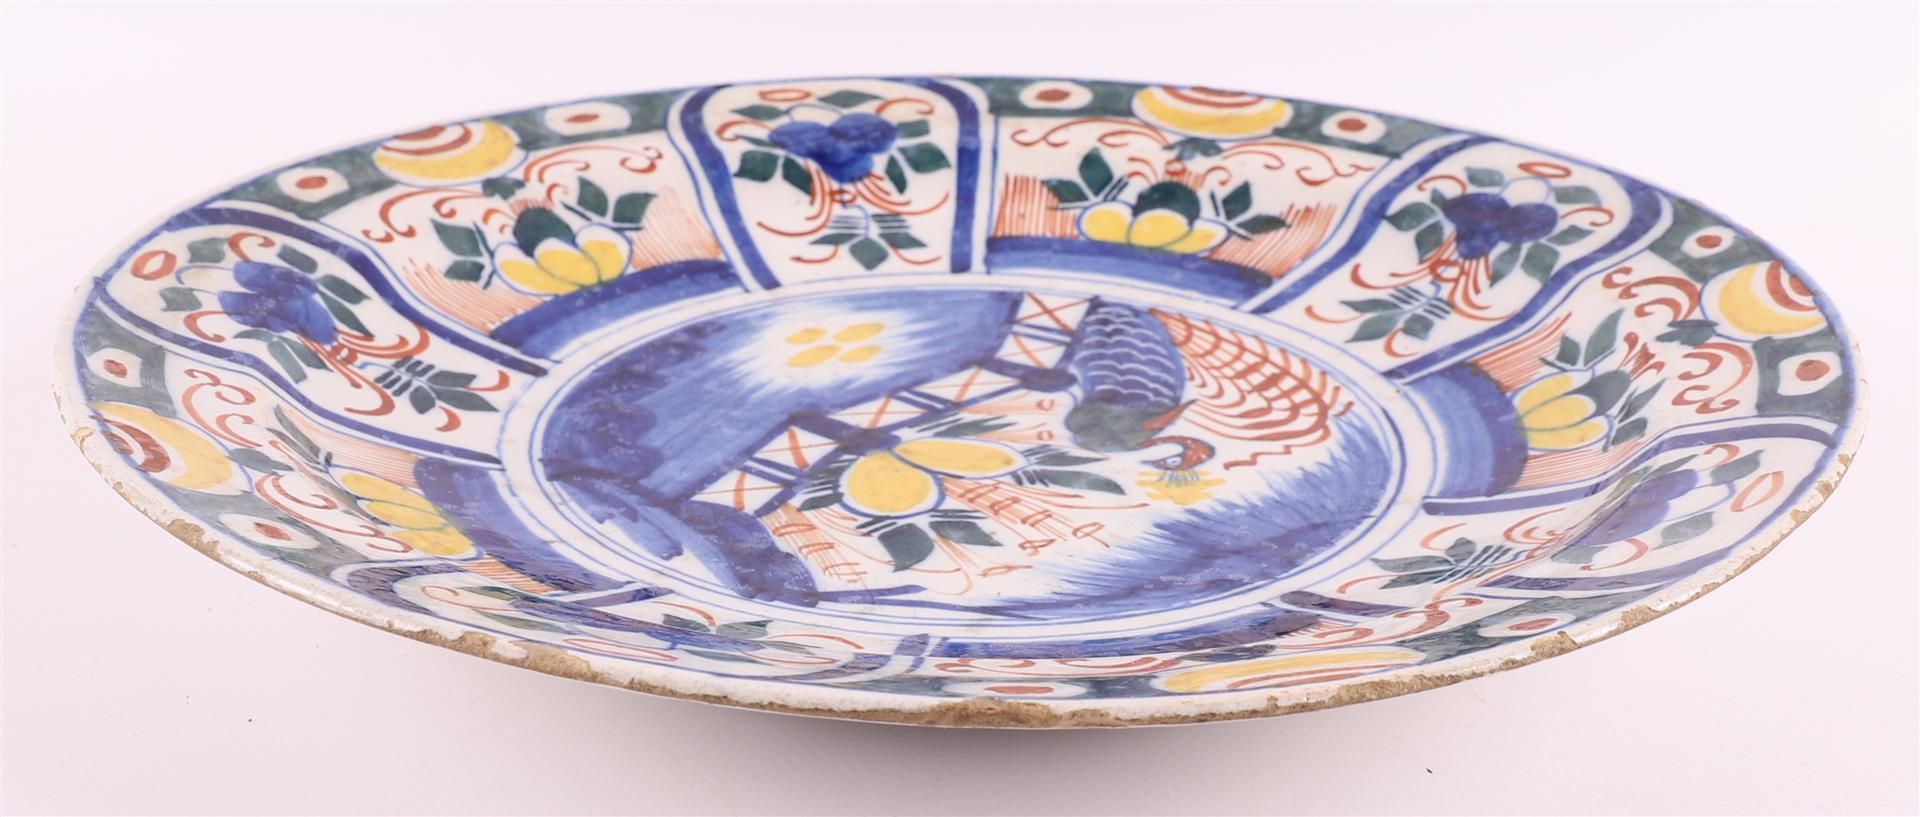 A polychrome Delft earthenware dish, 18th century. - Image 8 of 9